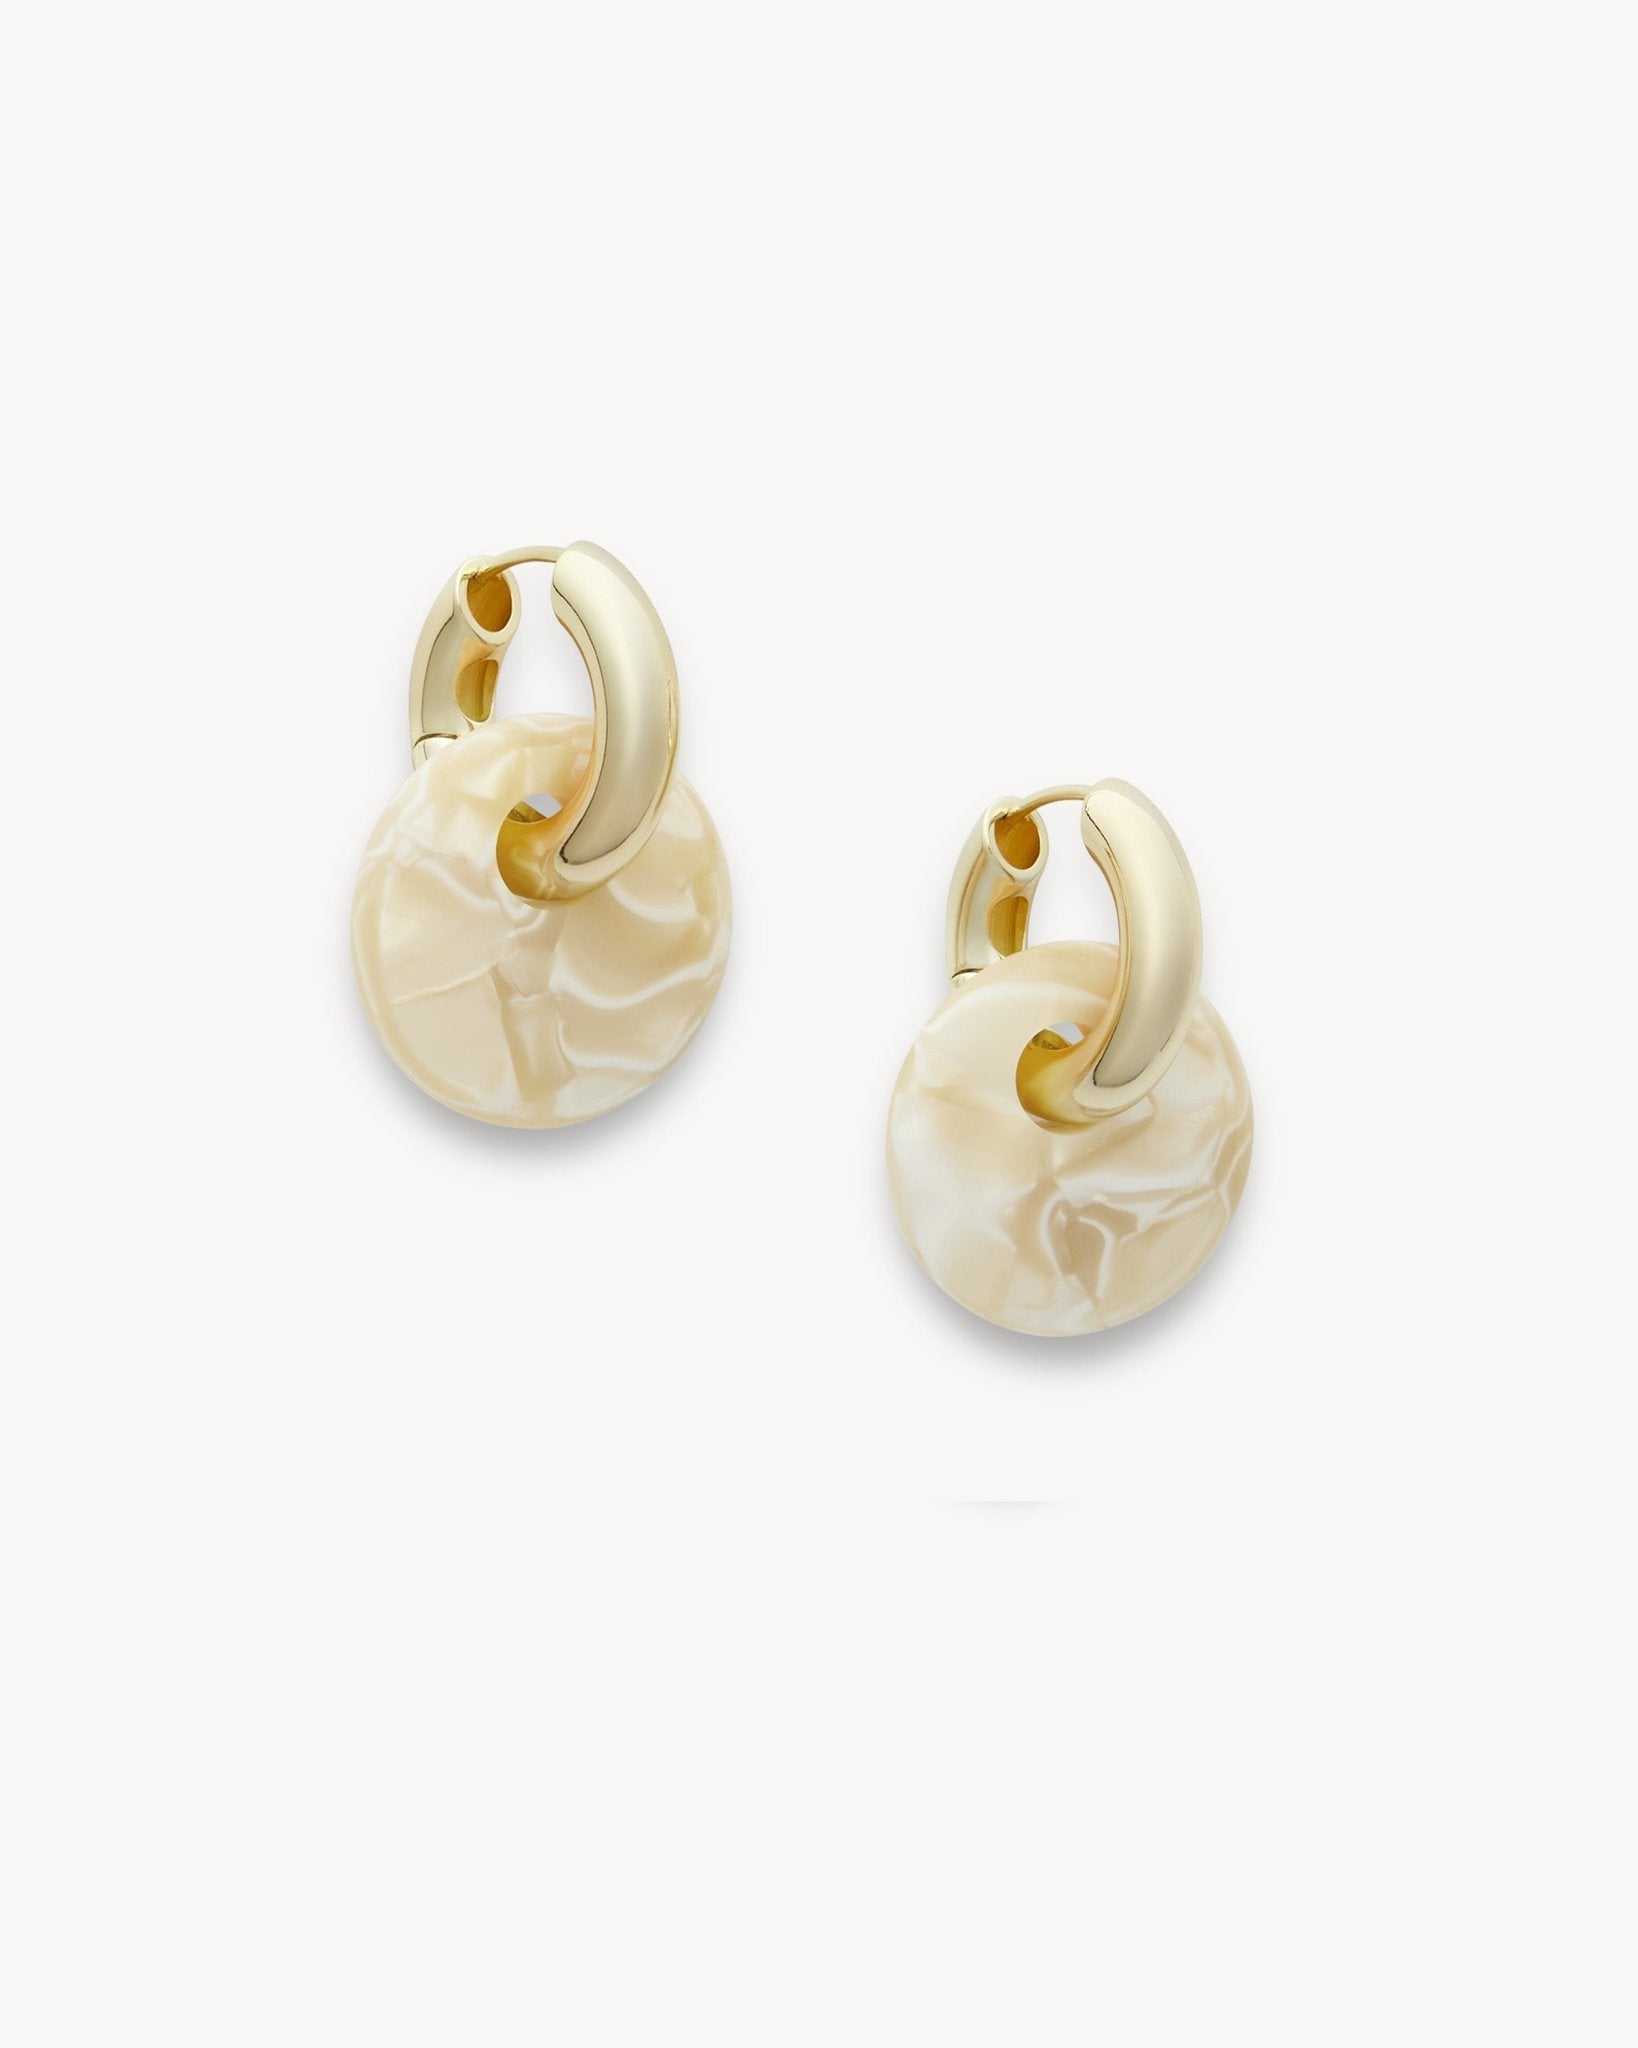 Disc Earring Charms in Ivory